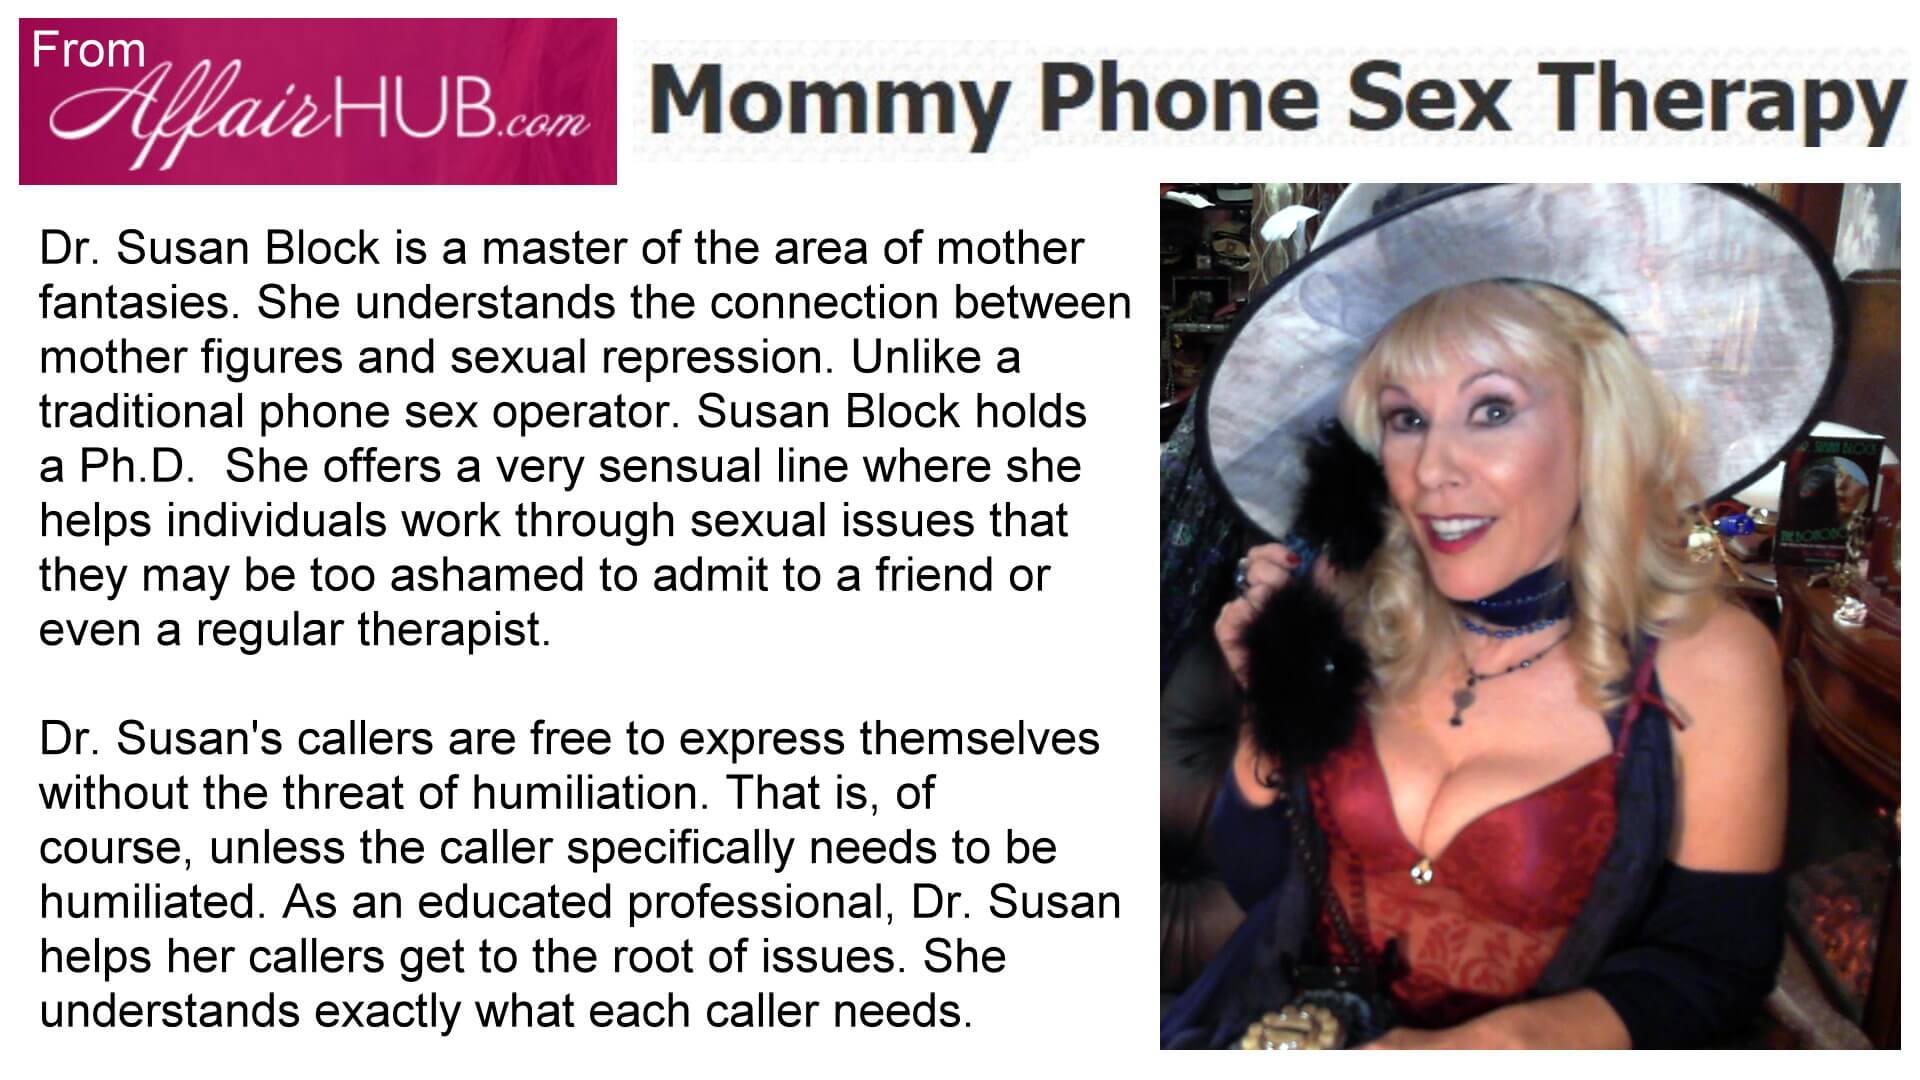 1920px x 1080px - Mom Phone Sex Therapy - Dr Susan Block Institute